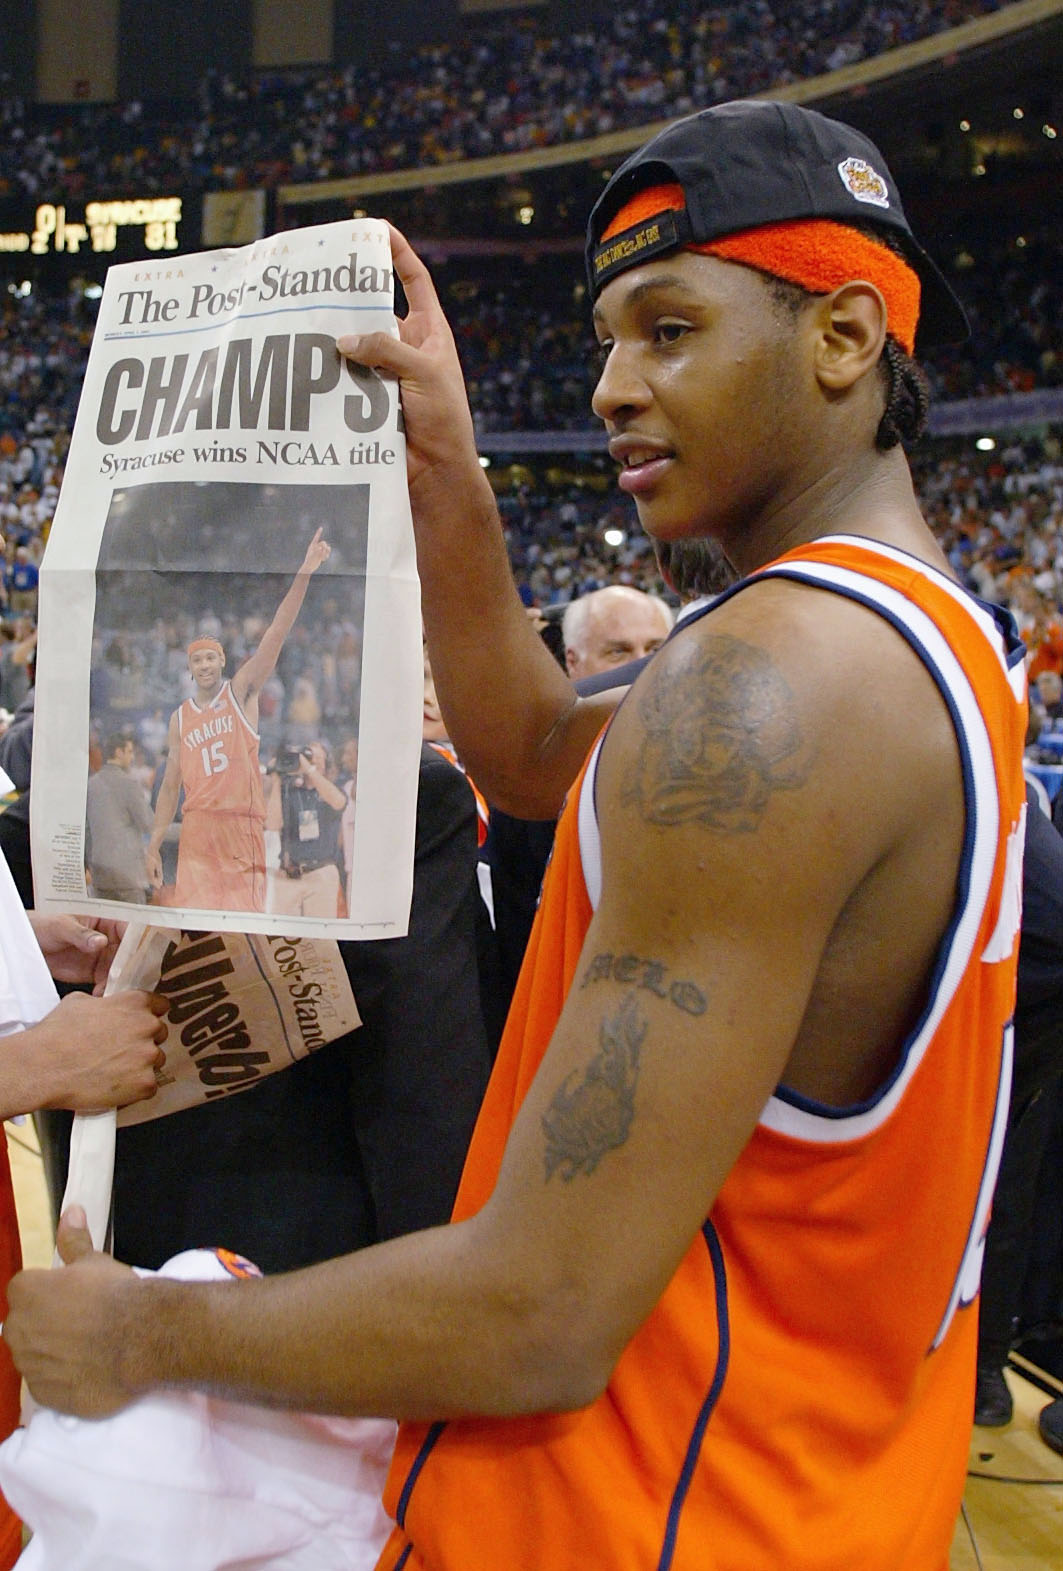 NEW ORLEANS - APRIL 7:  Carmelo Anthony #15 of Syracuse holds up tommorows paper which declares the Orangeman national champs after he and his team defeated Kansas 81-78 during the championship game of the NCAA Men's Final Four Tournament on April 7, 2003